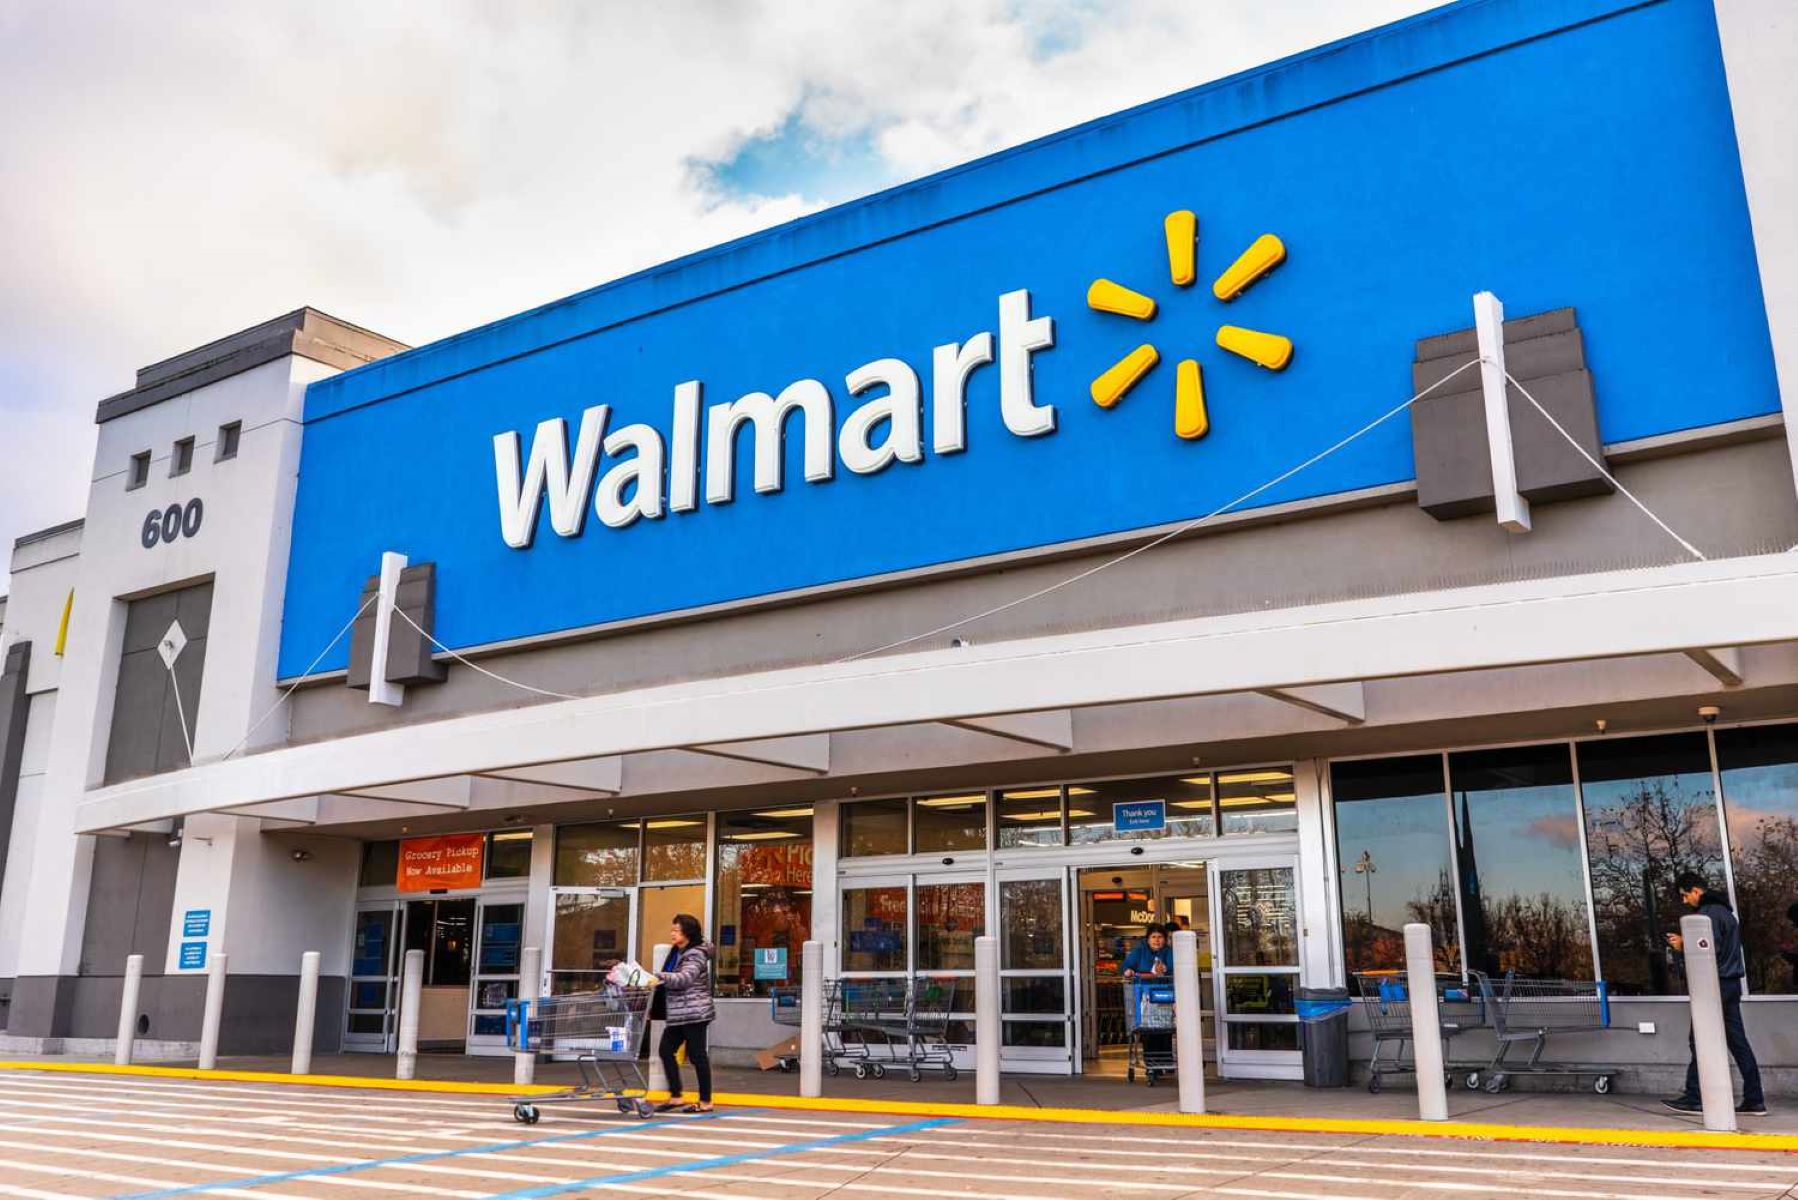 You Won't Believe Which Walmarts Are Open 24 Hours In The United States!